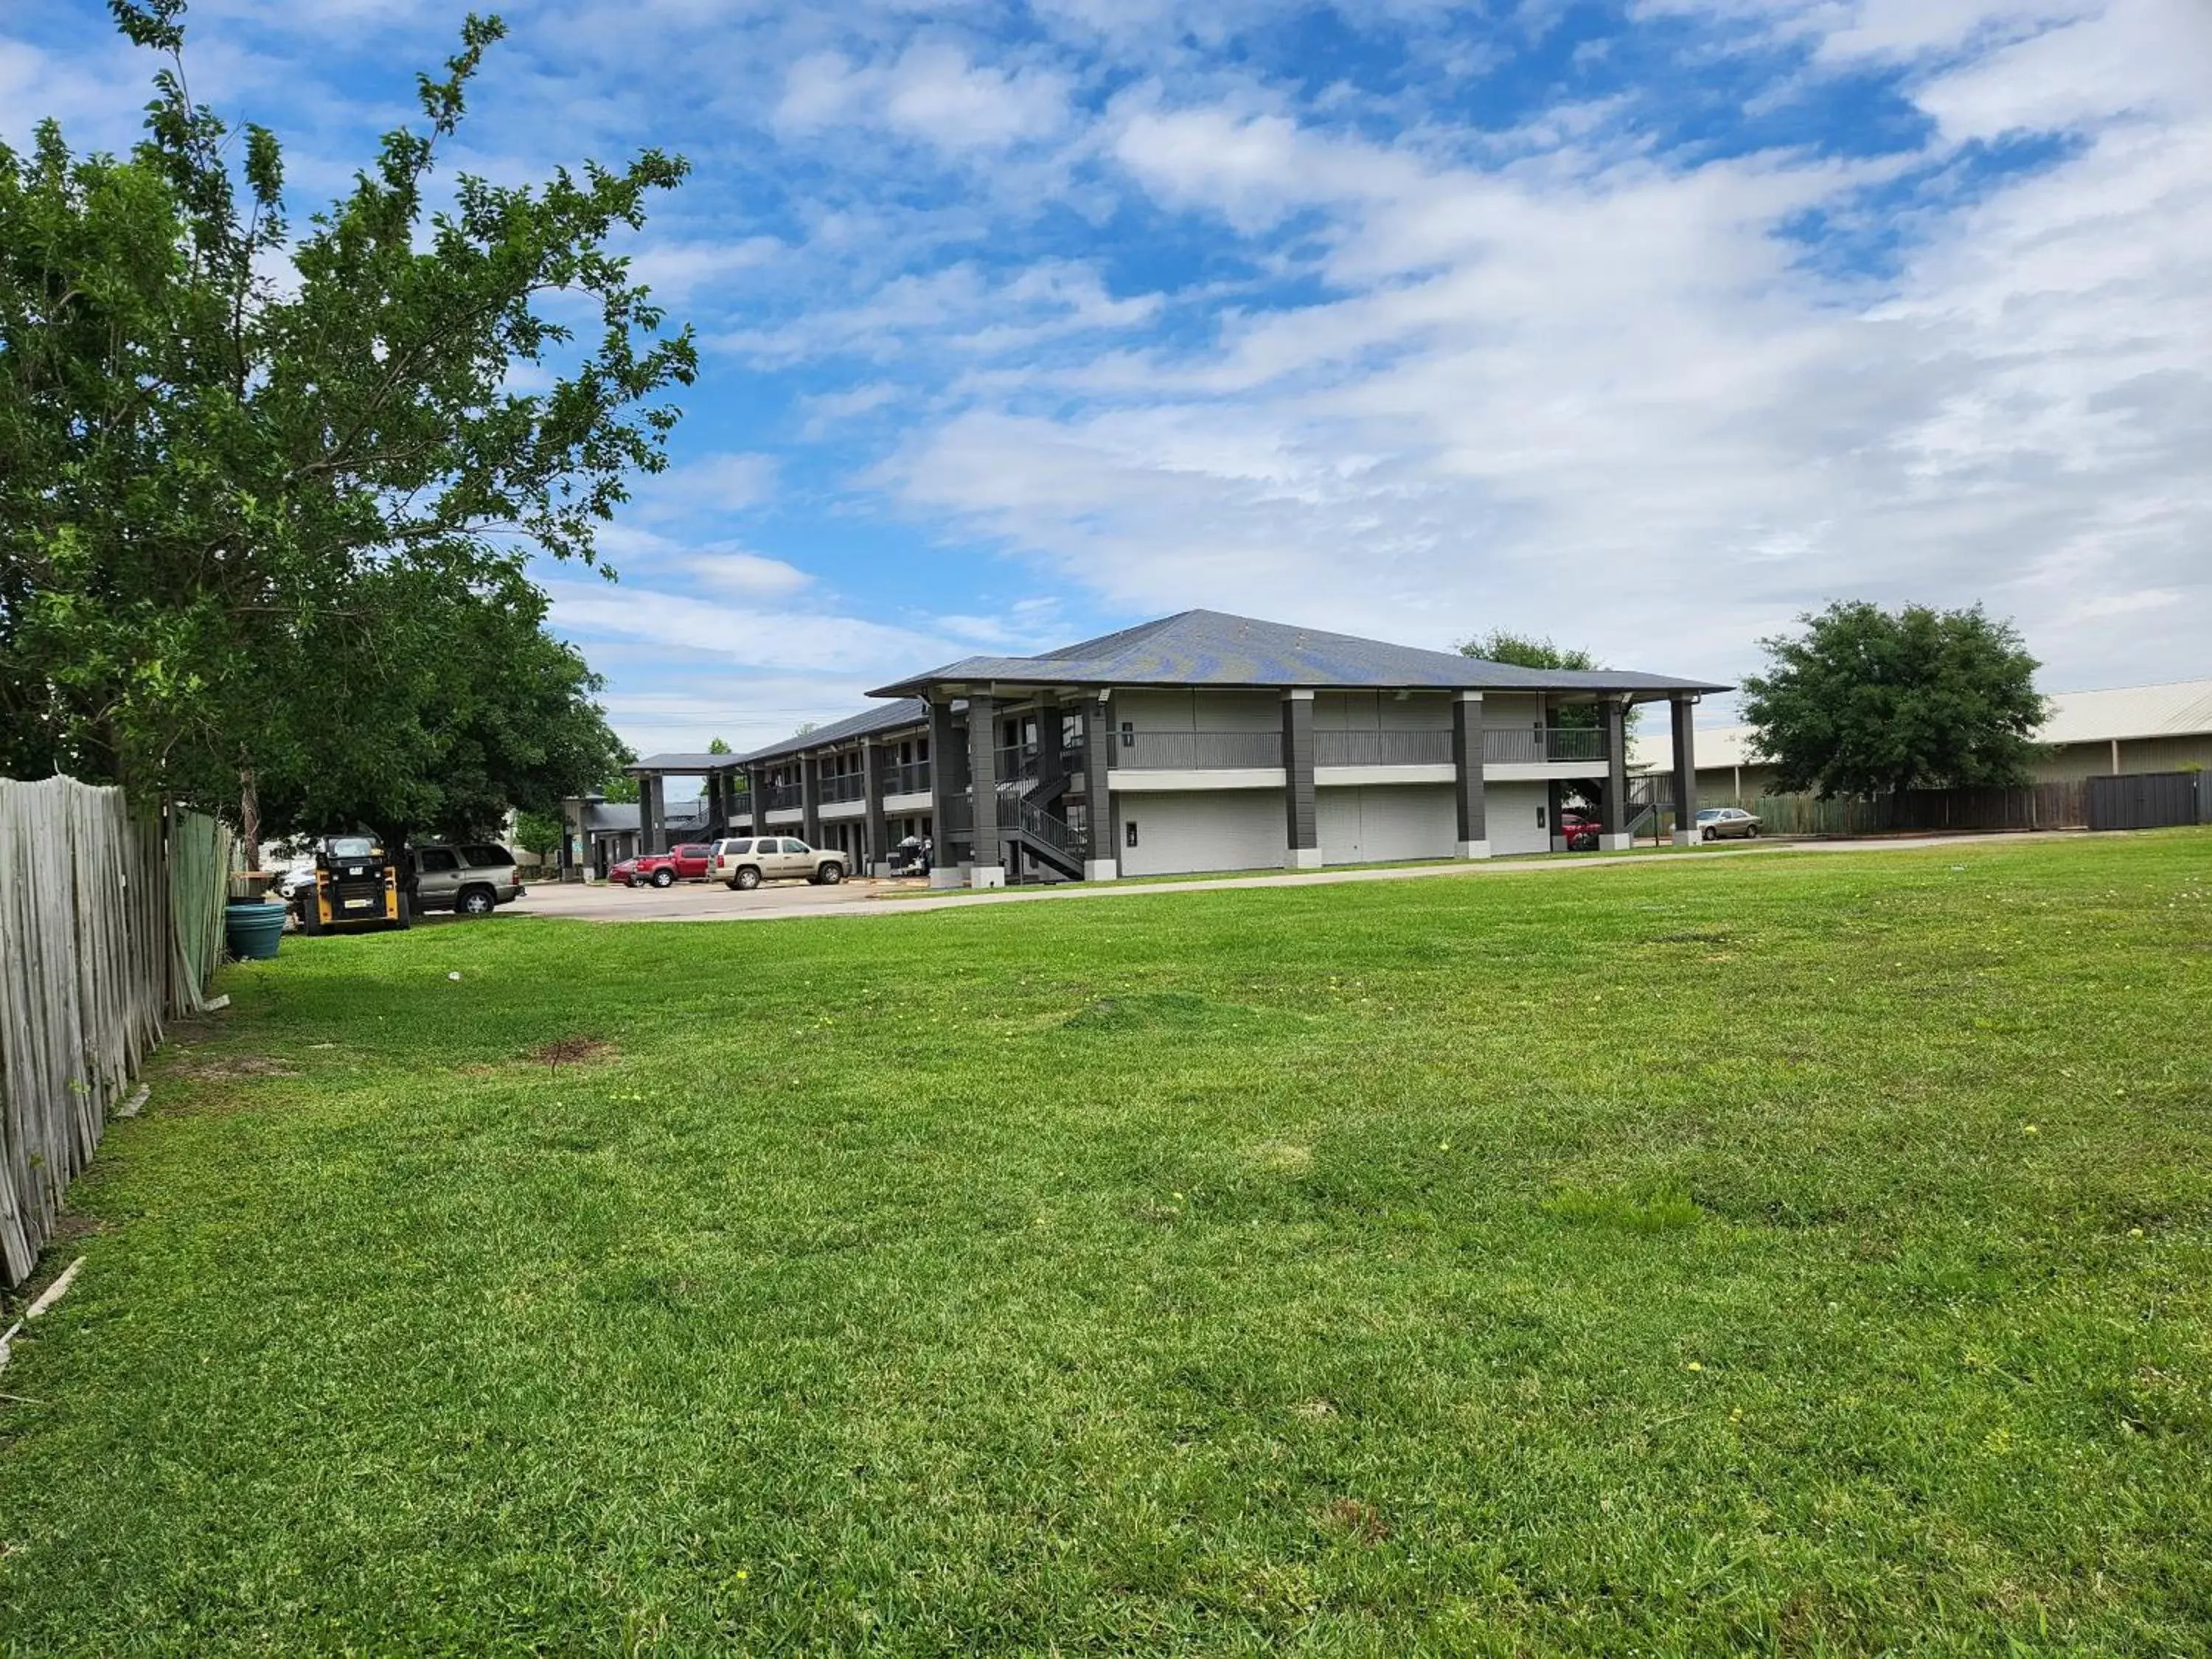 Parking, Property Building in Express Inn Hobby Airport